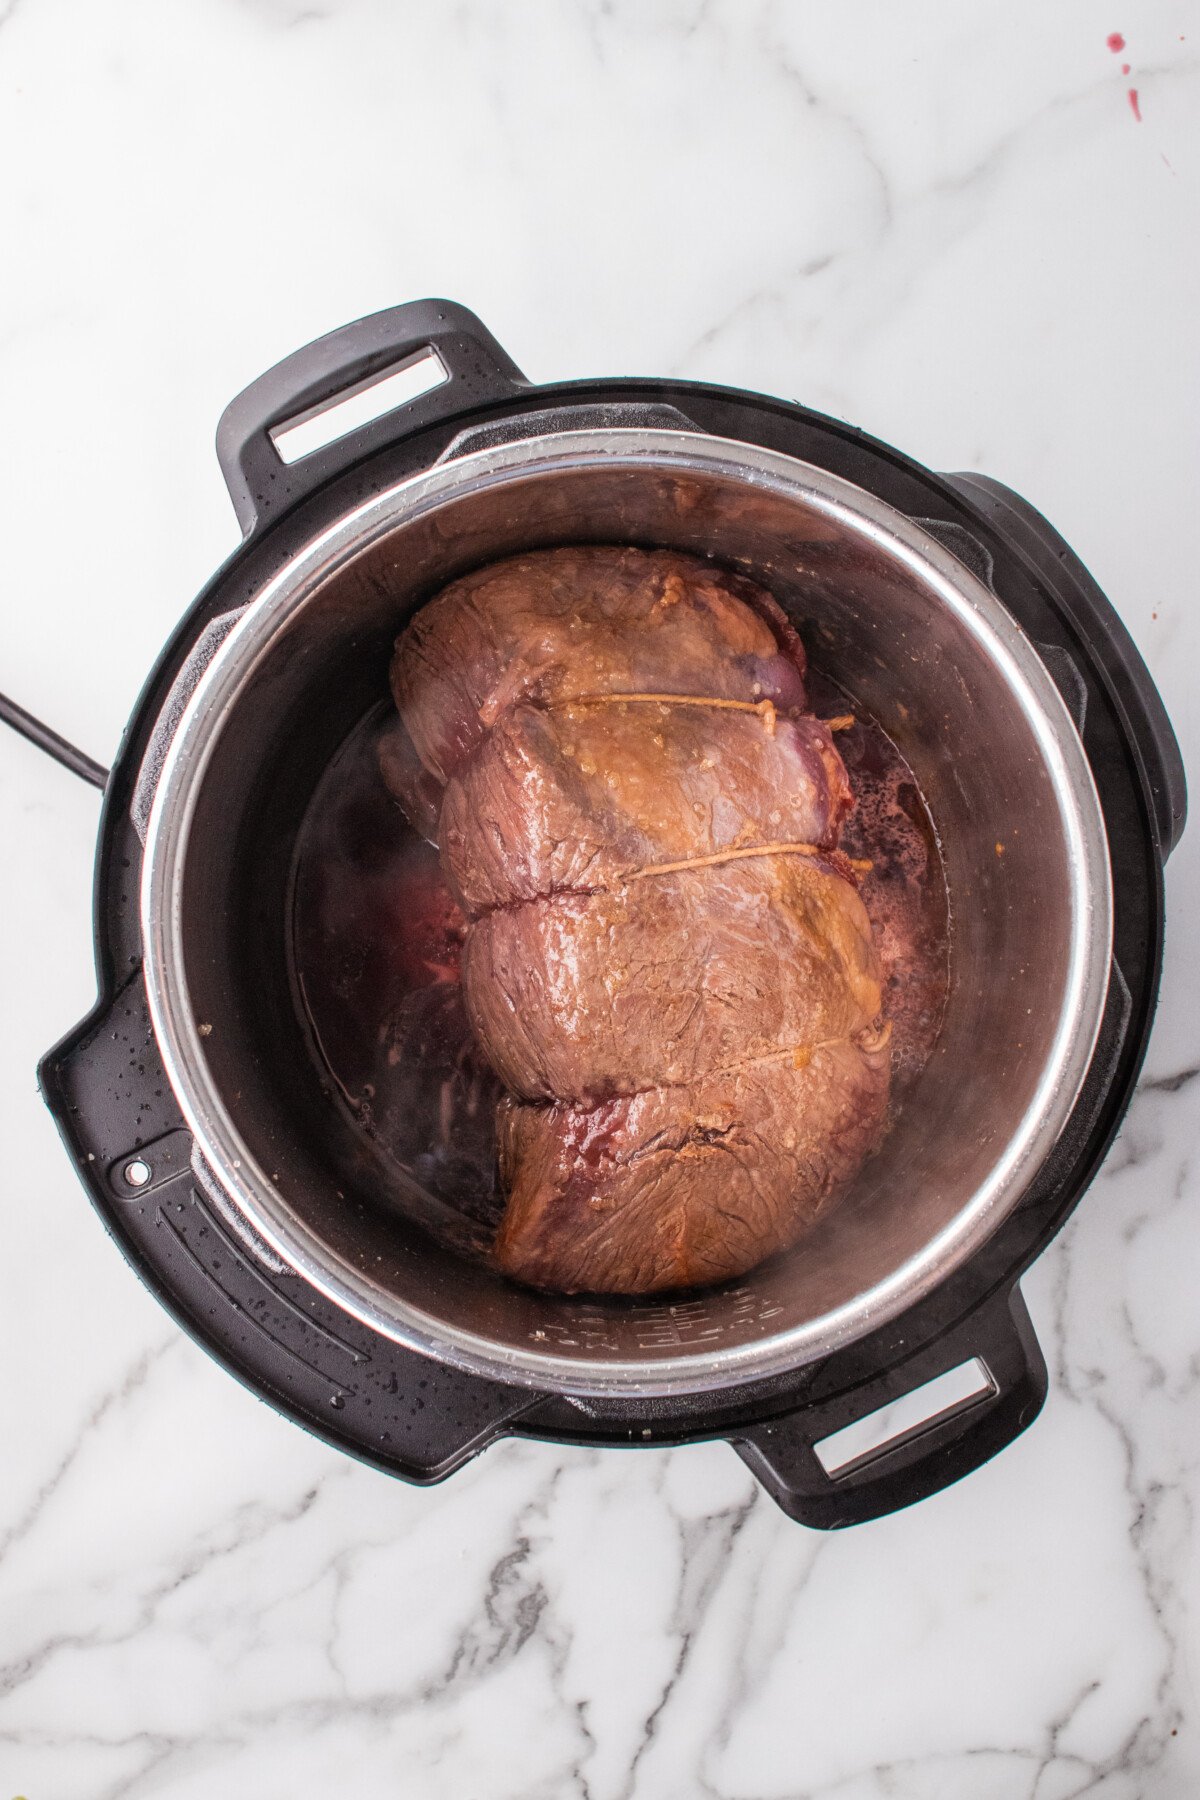 Roast being seared on all sides in the pressure cooker before the other ingredients are added.